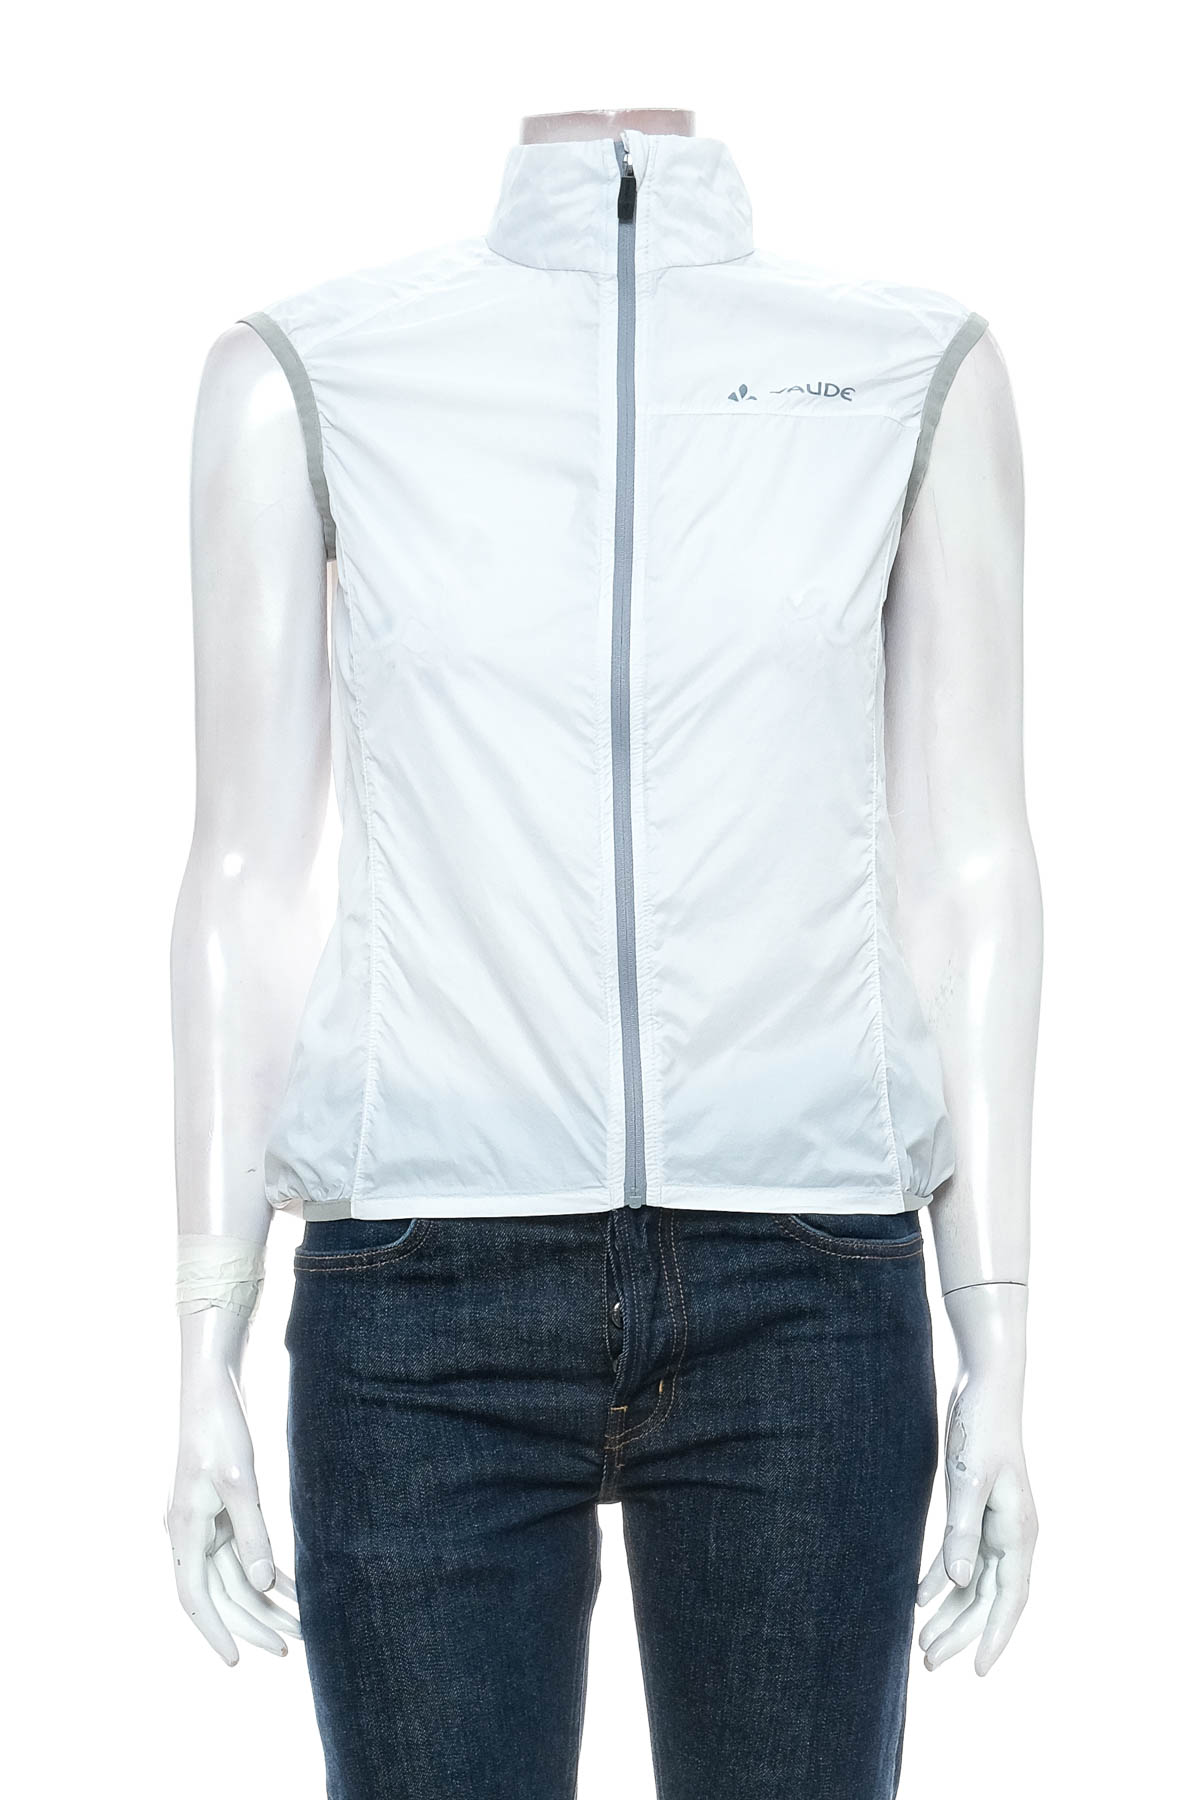 Women's vest for cycling - 0